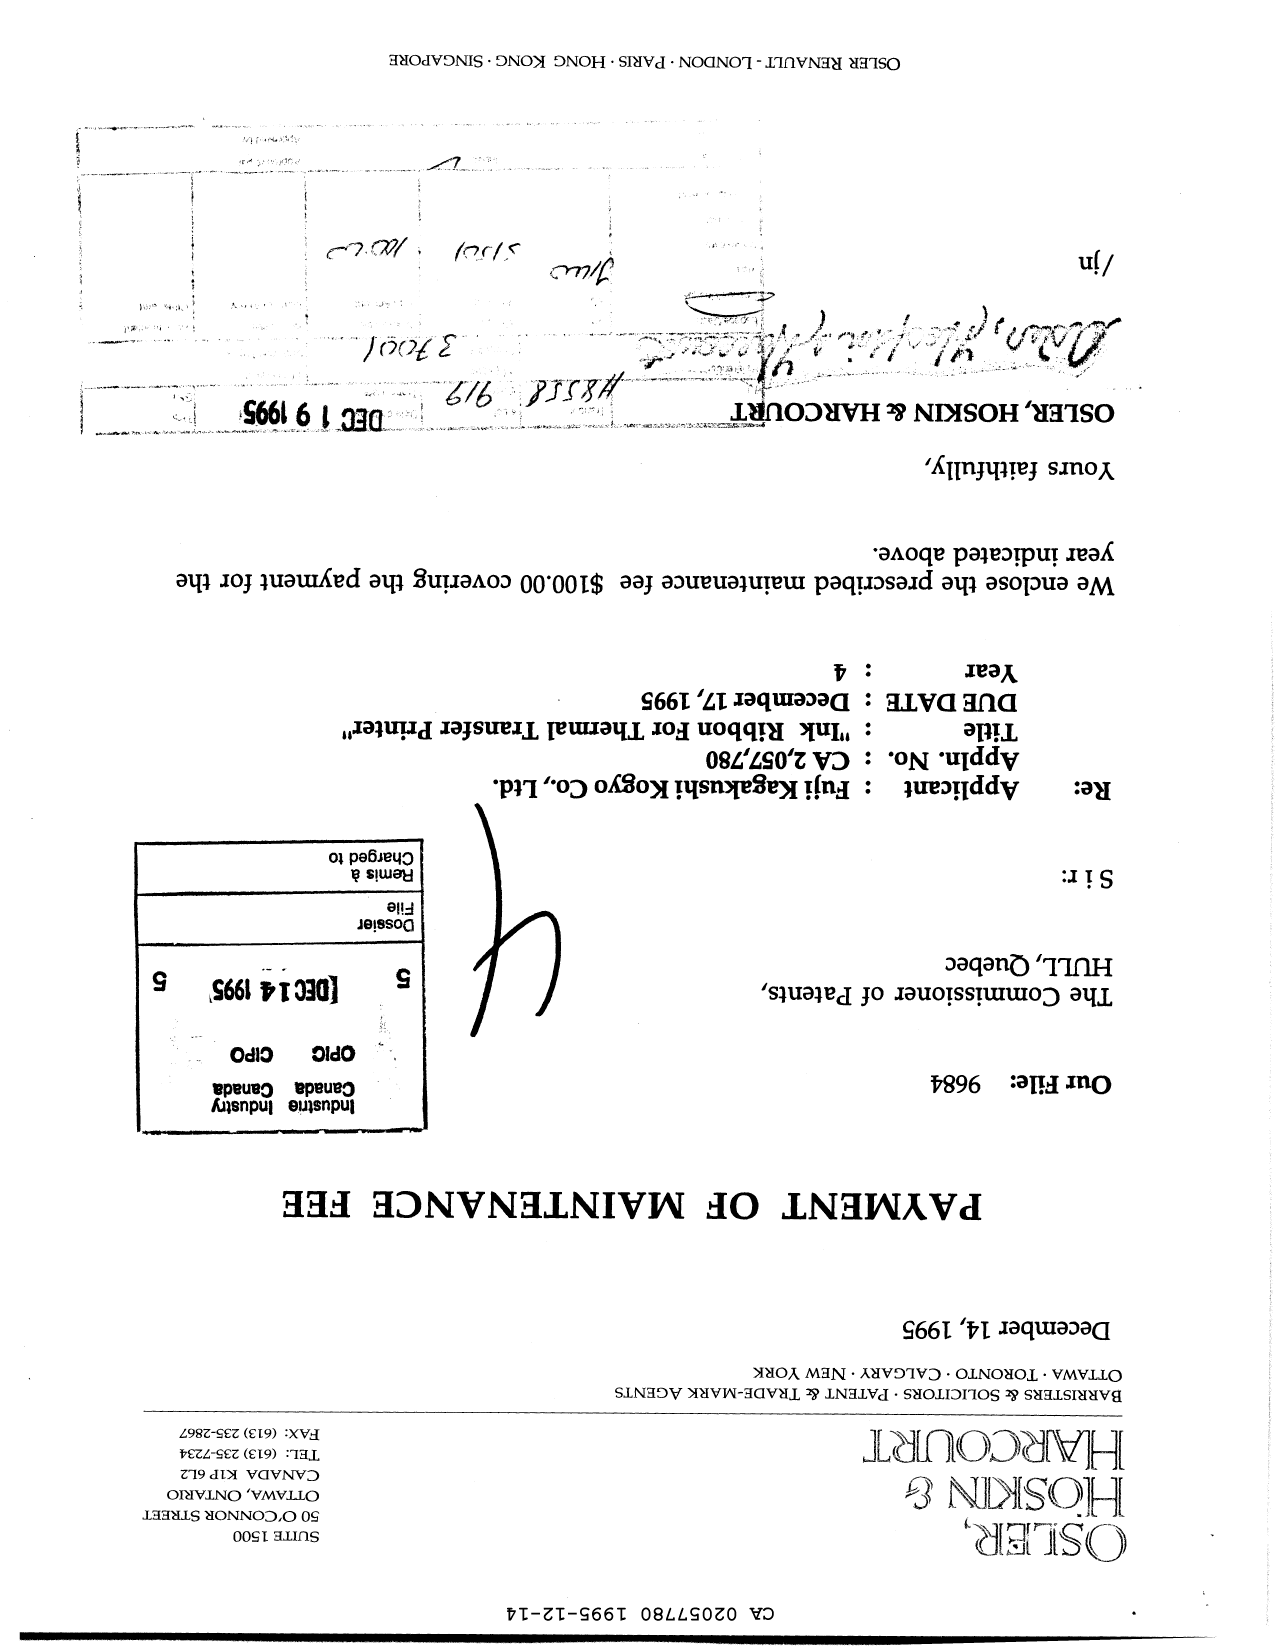 Canadian Patent Document 2057780. Fees 19951214. Image 1 of 1